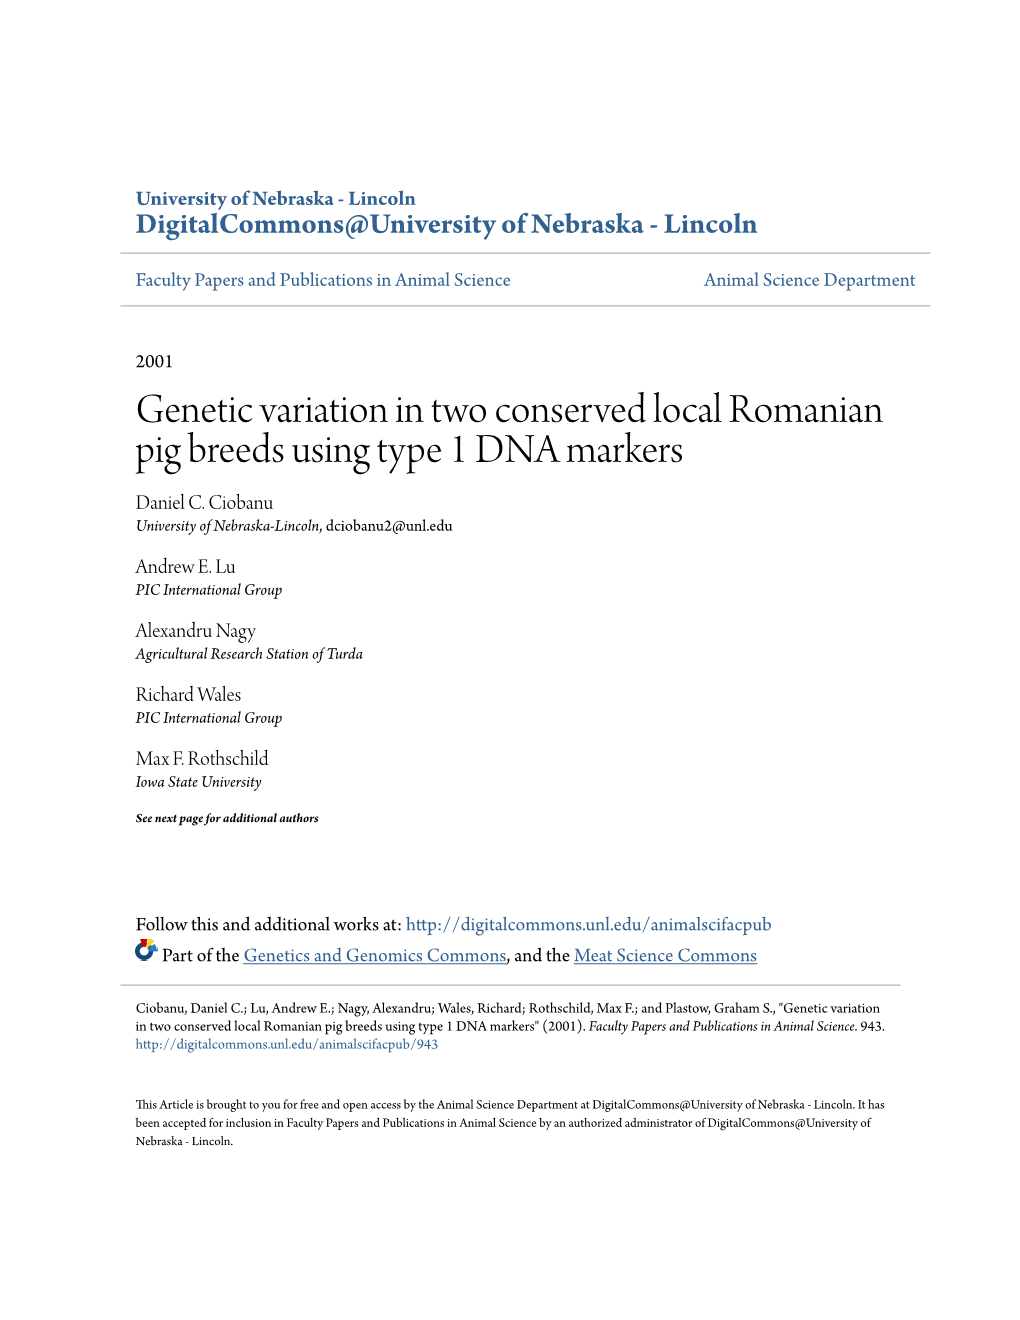 Genetic Variation in Two Conserved Local Romanian Pig Breeds Using Type 1 DNA Markers Daniel C